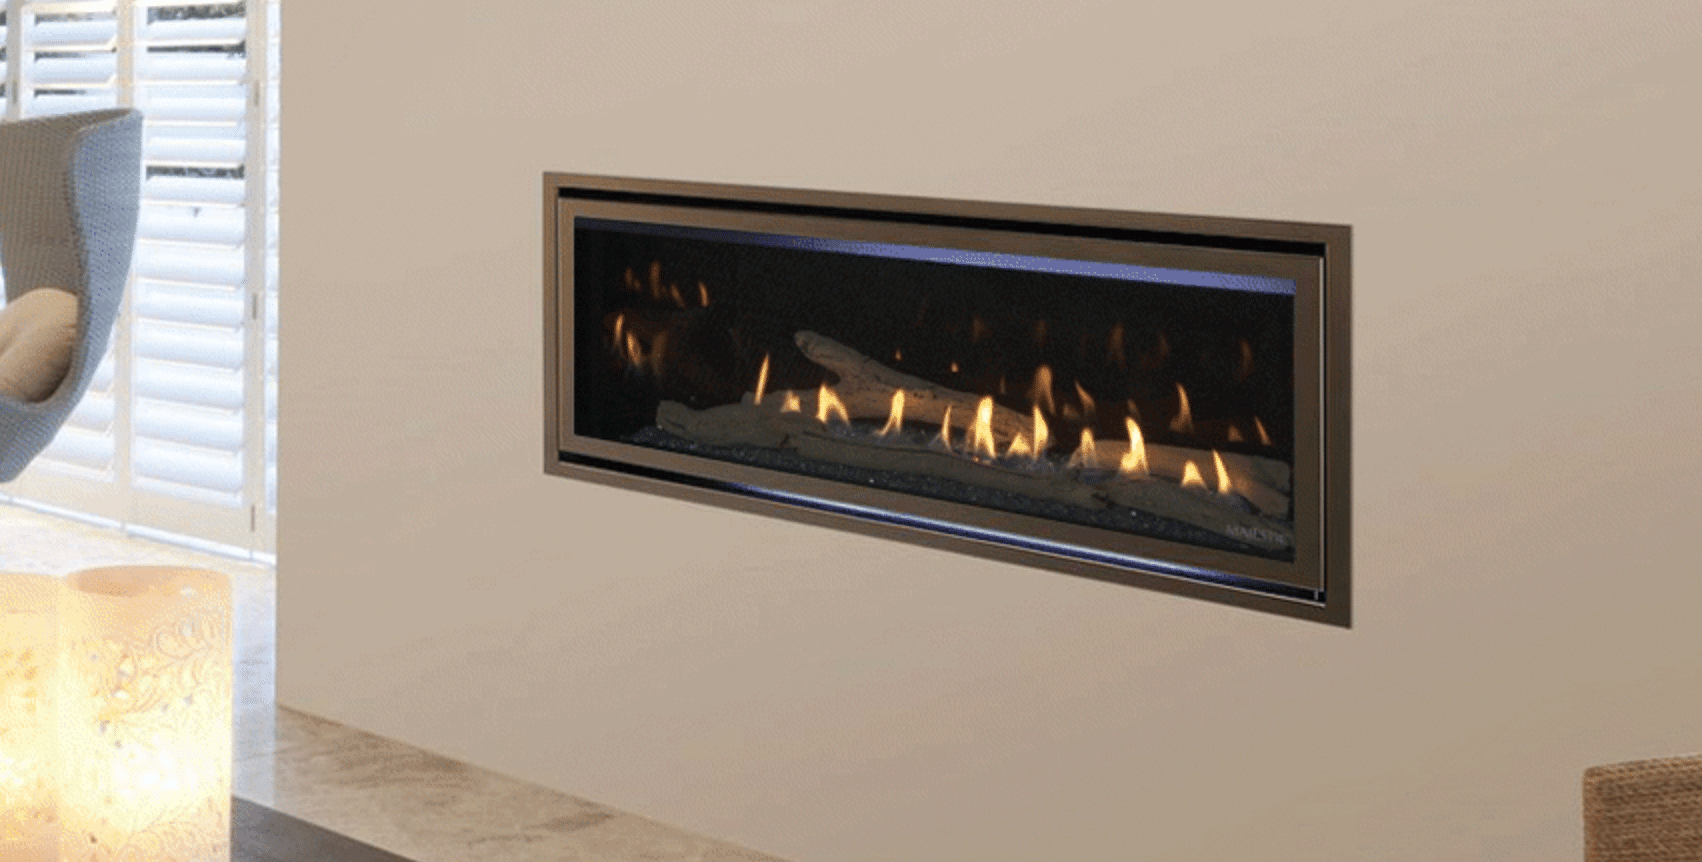 Long rectangular electric fireplace, lit, in white wall of a home.